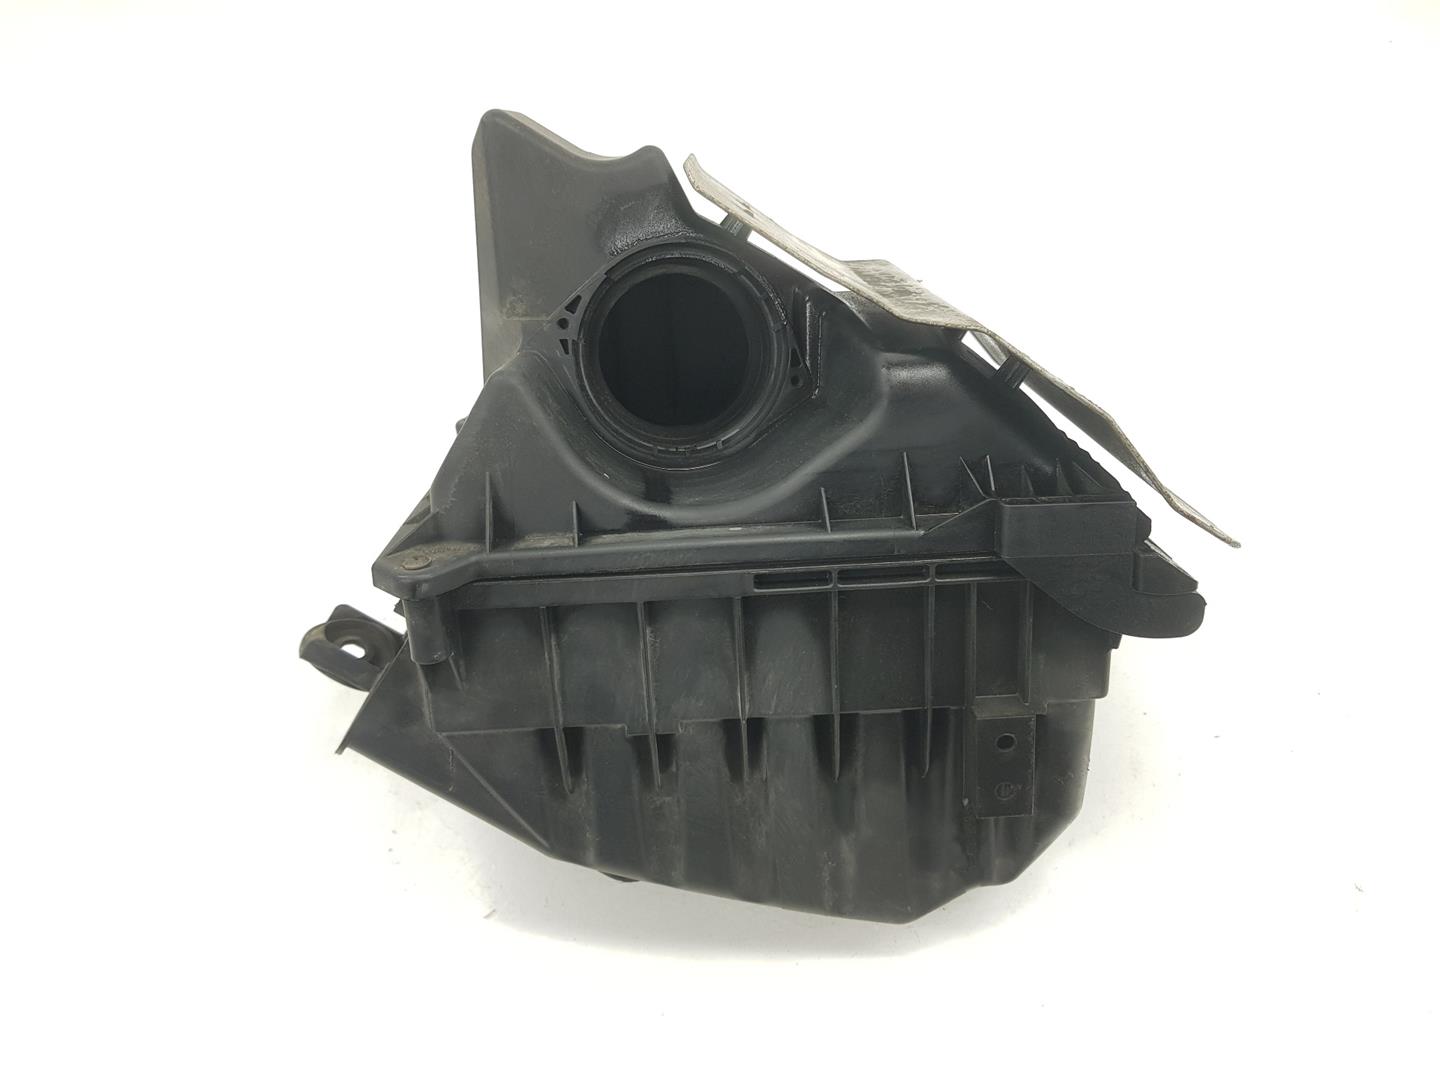 AUDI A4 B6/8E (2000-2005) Other Engine Compartment Parts 03G133835, 03G133835 24226839